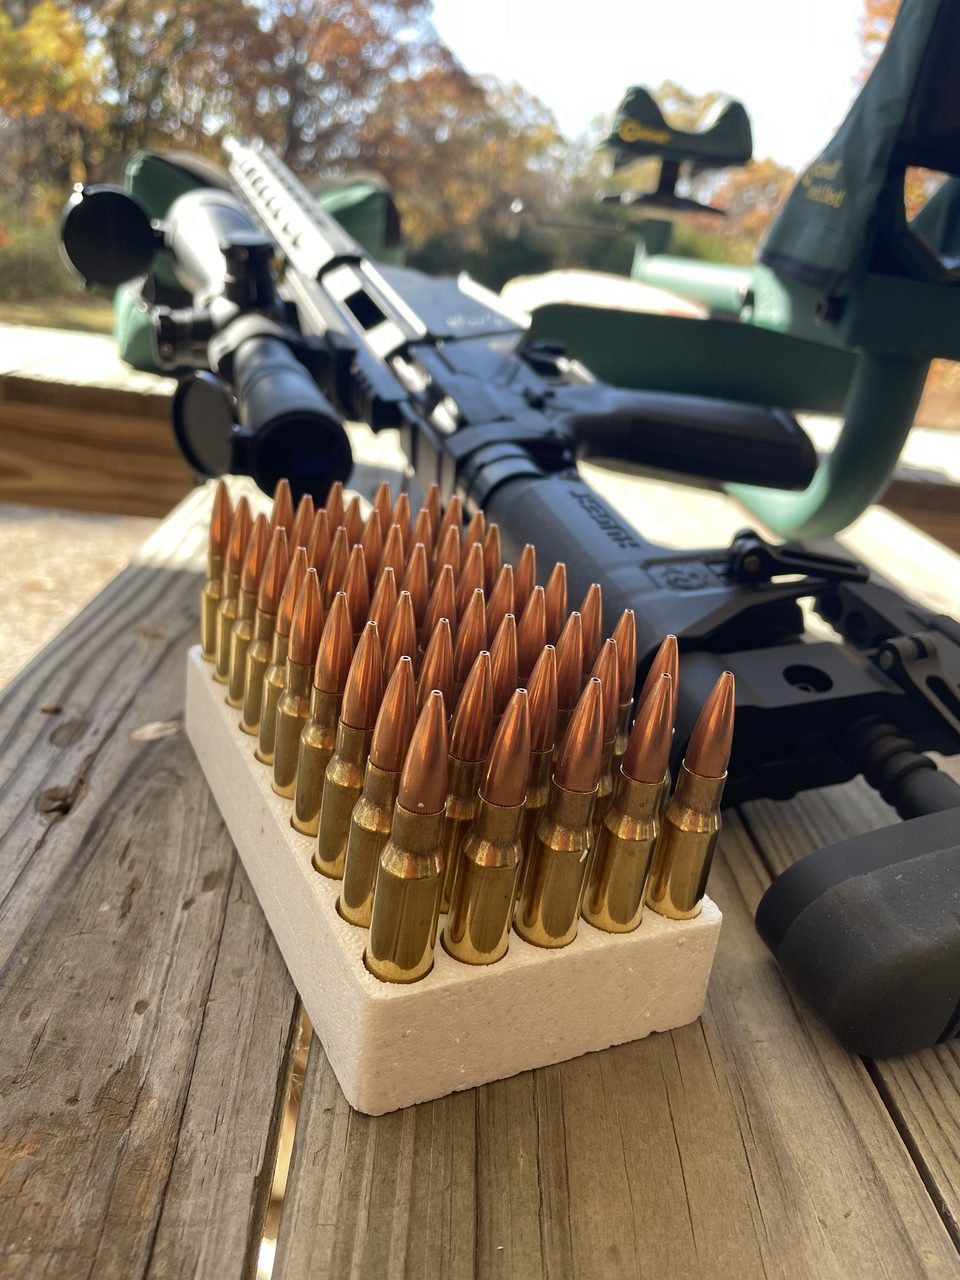 Hornady ammo and Ruger Precision Rifle